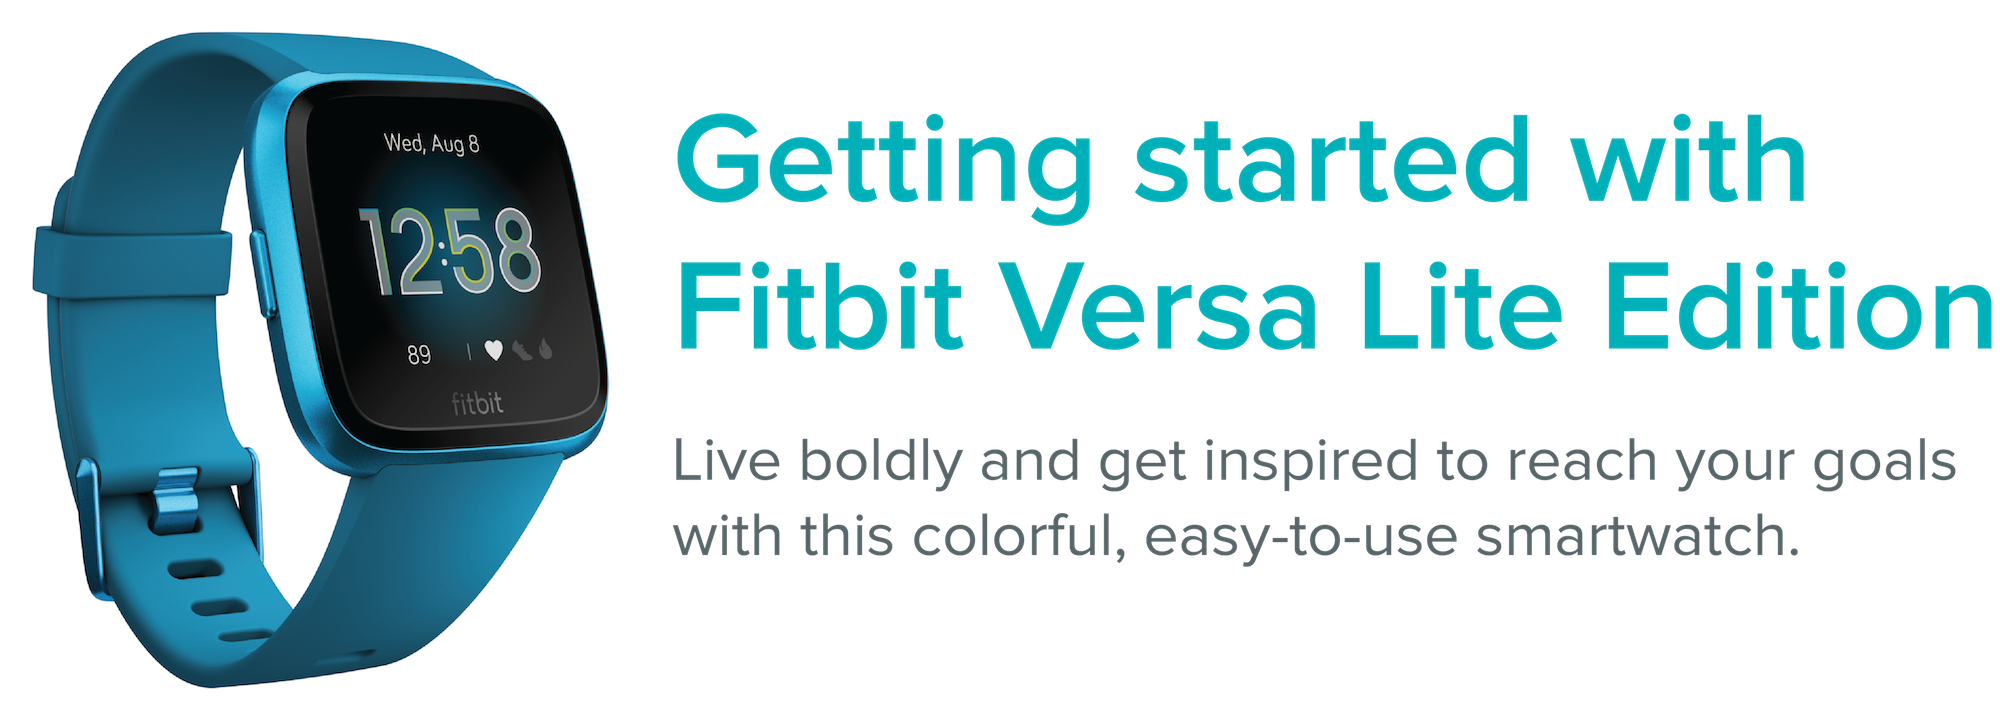 How do I get started with Fitbit Versa Edition?